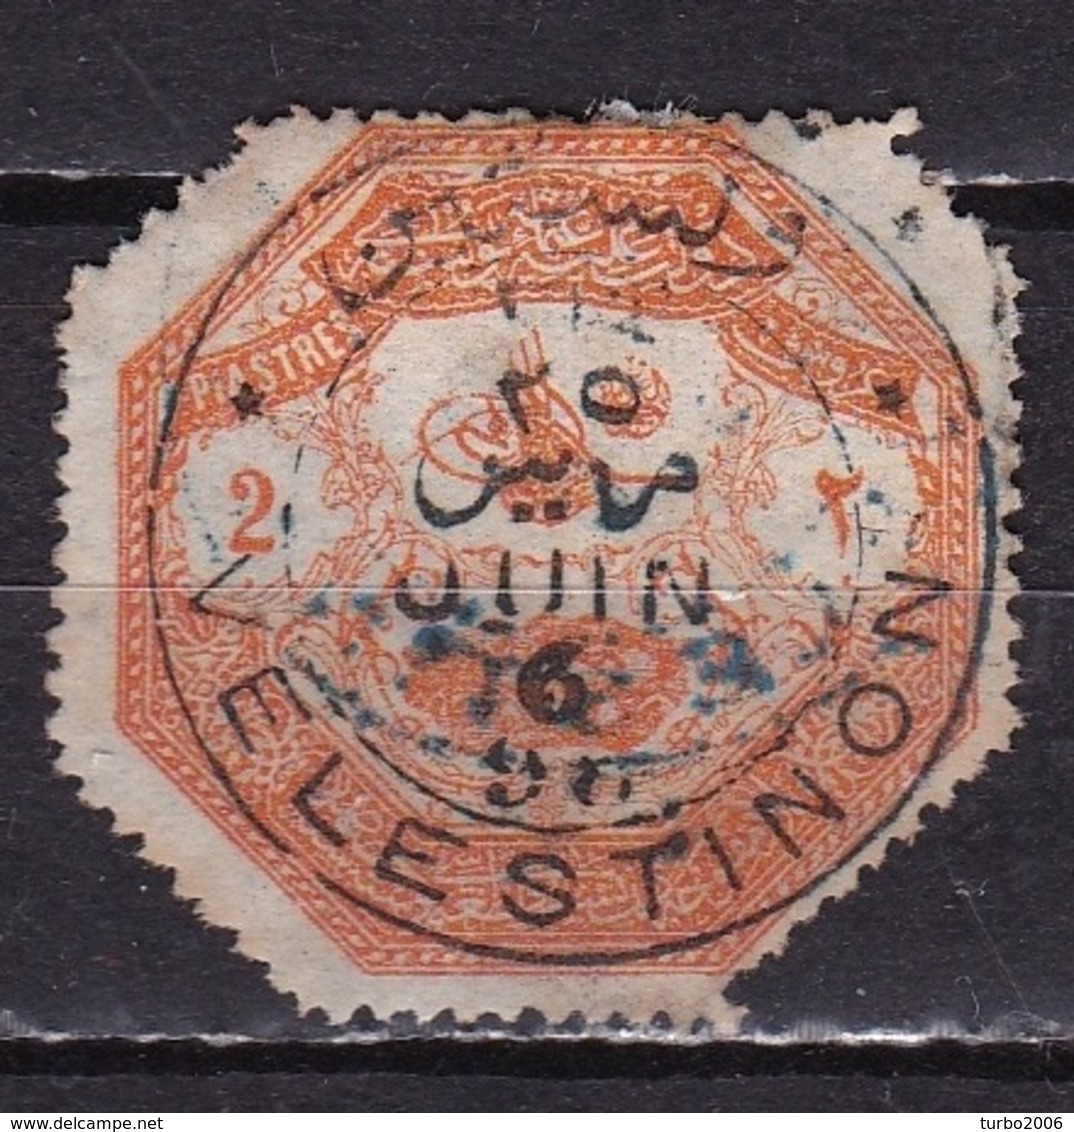 THESSALIA  1898 2 Pi Orange Used VELESTINON By The Turkish Army Of Occupation During The Greek-Turkish War Of 1897 Vl. 4 - Thessaly